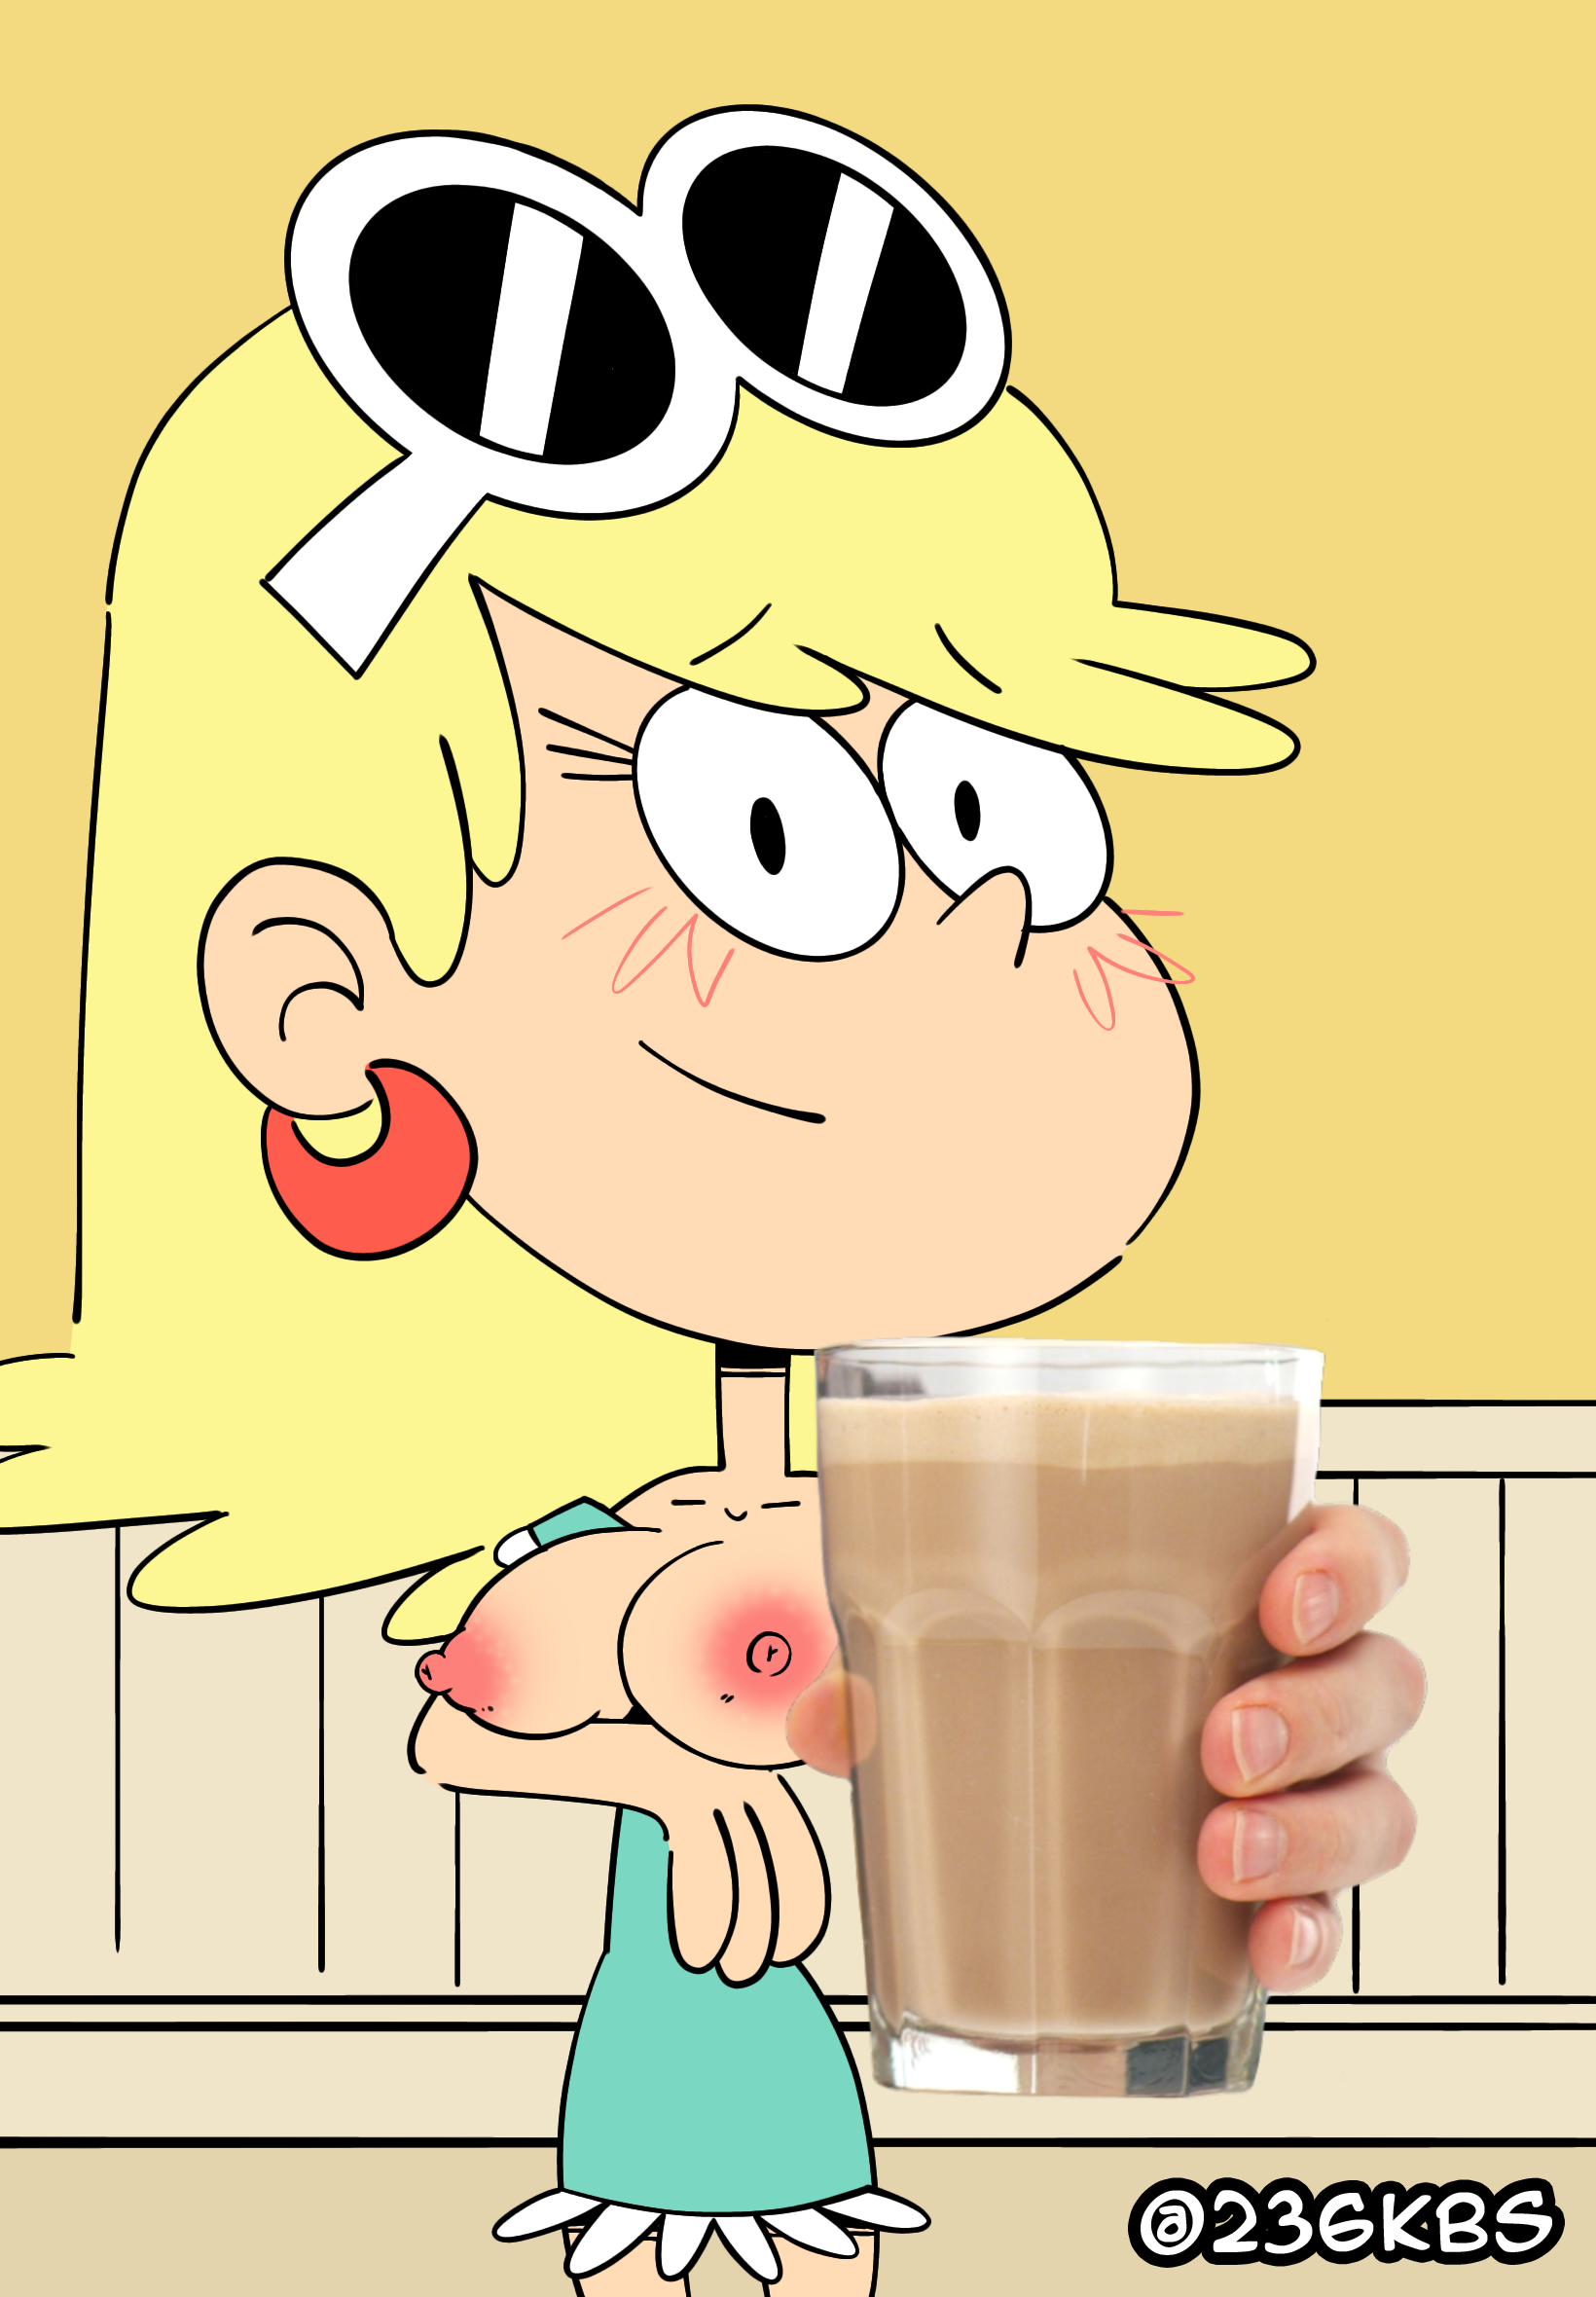 Post 4595929 236kbs Leniloud Theloudhouse 9553